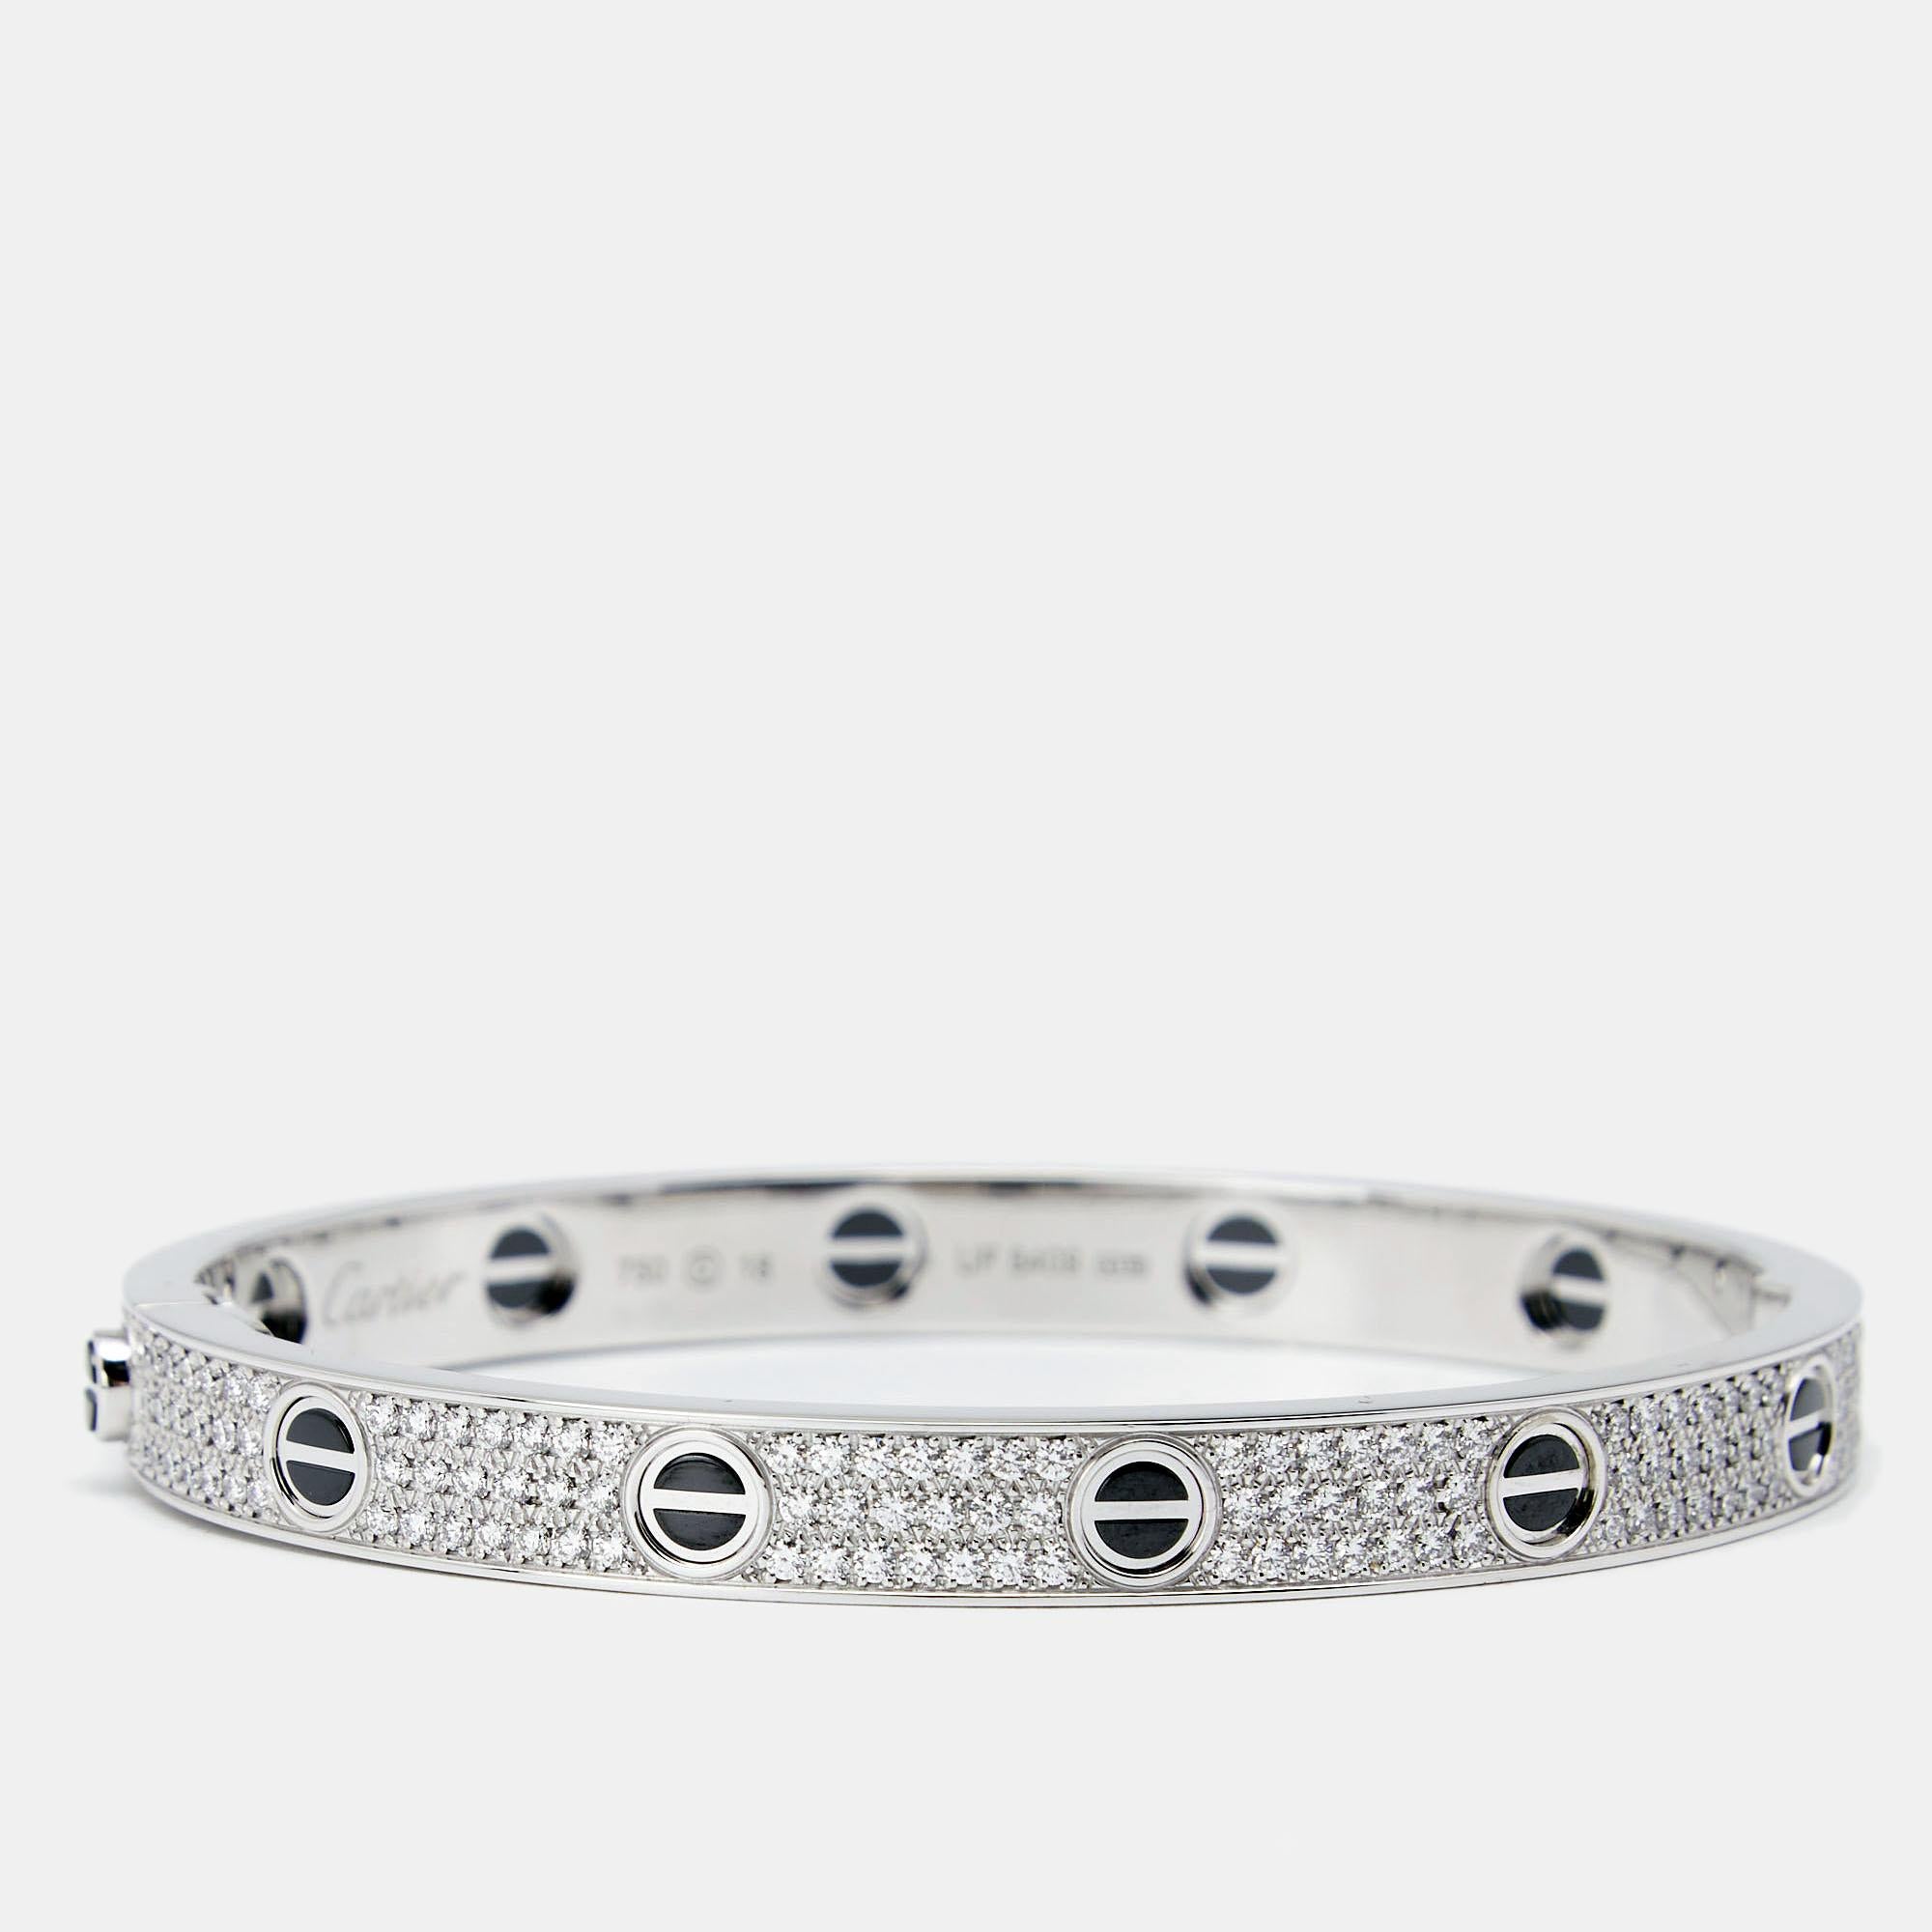 Precious stones are used to transform this Cartier Love bracelet into an exceptional jewel you can wear on special days. Sculpted using 18k white gold and covered in incredible diamonds, the bracelet is a treat to the eyes. It is also added with the